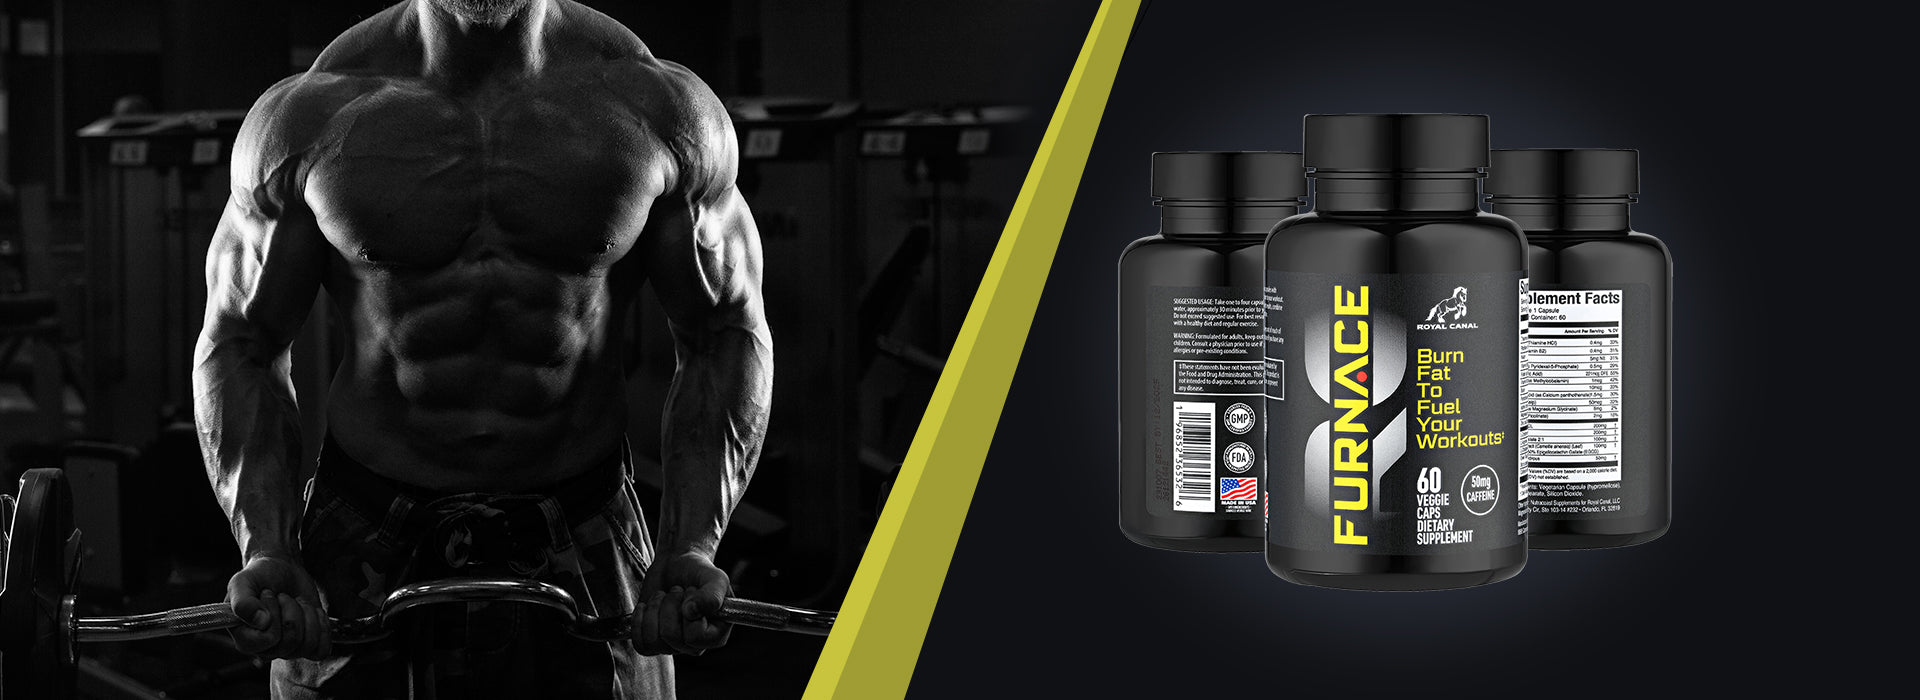 The best pre workout supplement for muscle strength